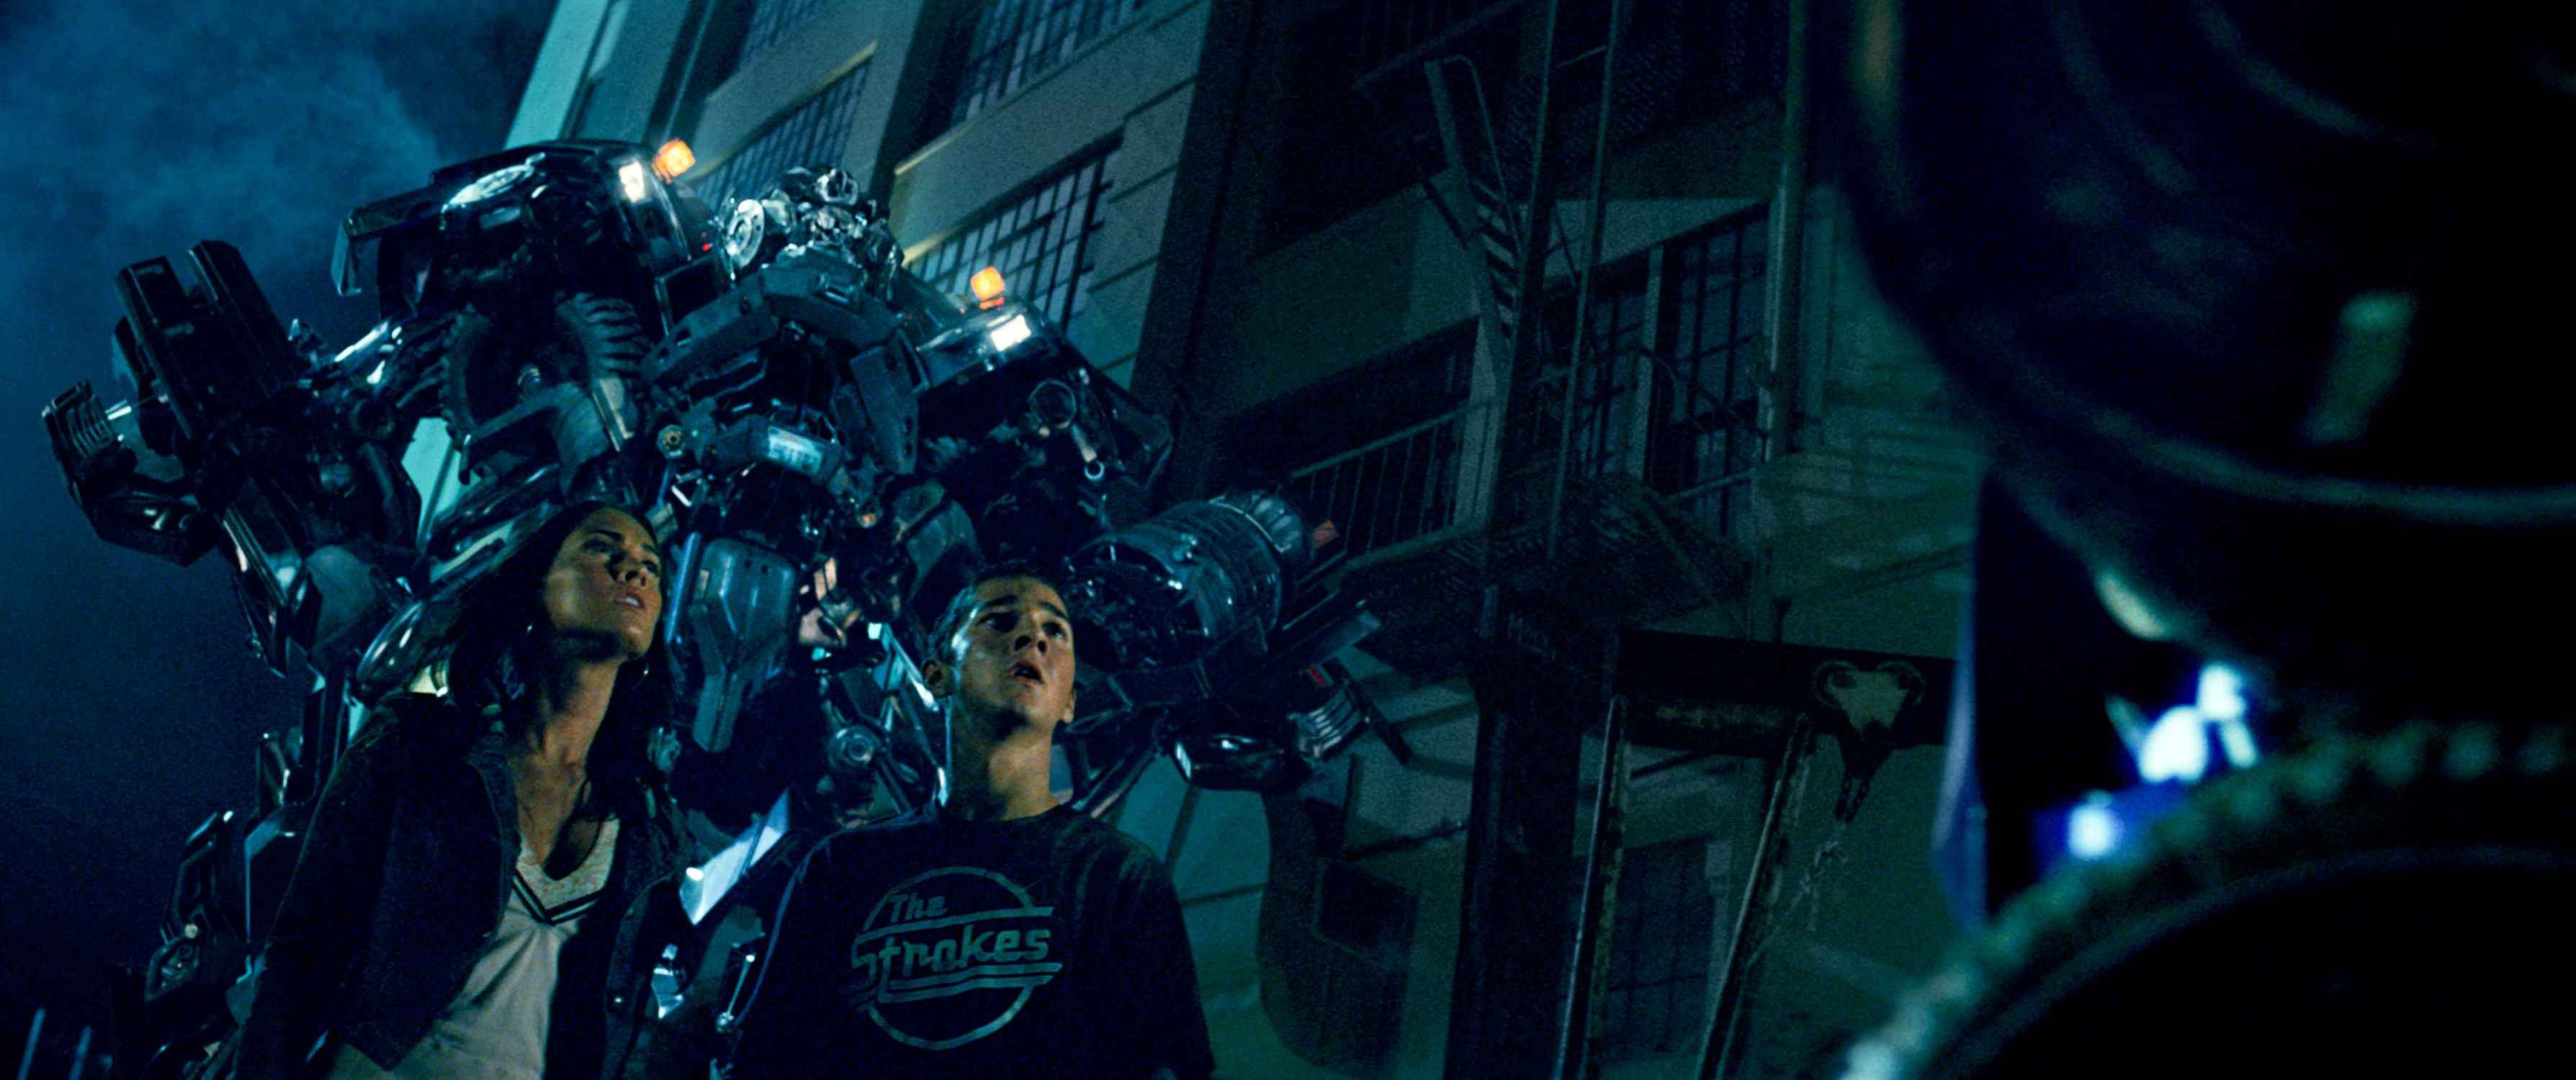 Sam Witwicky, Transformers protagonist, Action-packed movies, Epic soundtracks, 3580x1500 Dual Screen Desktop